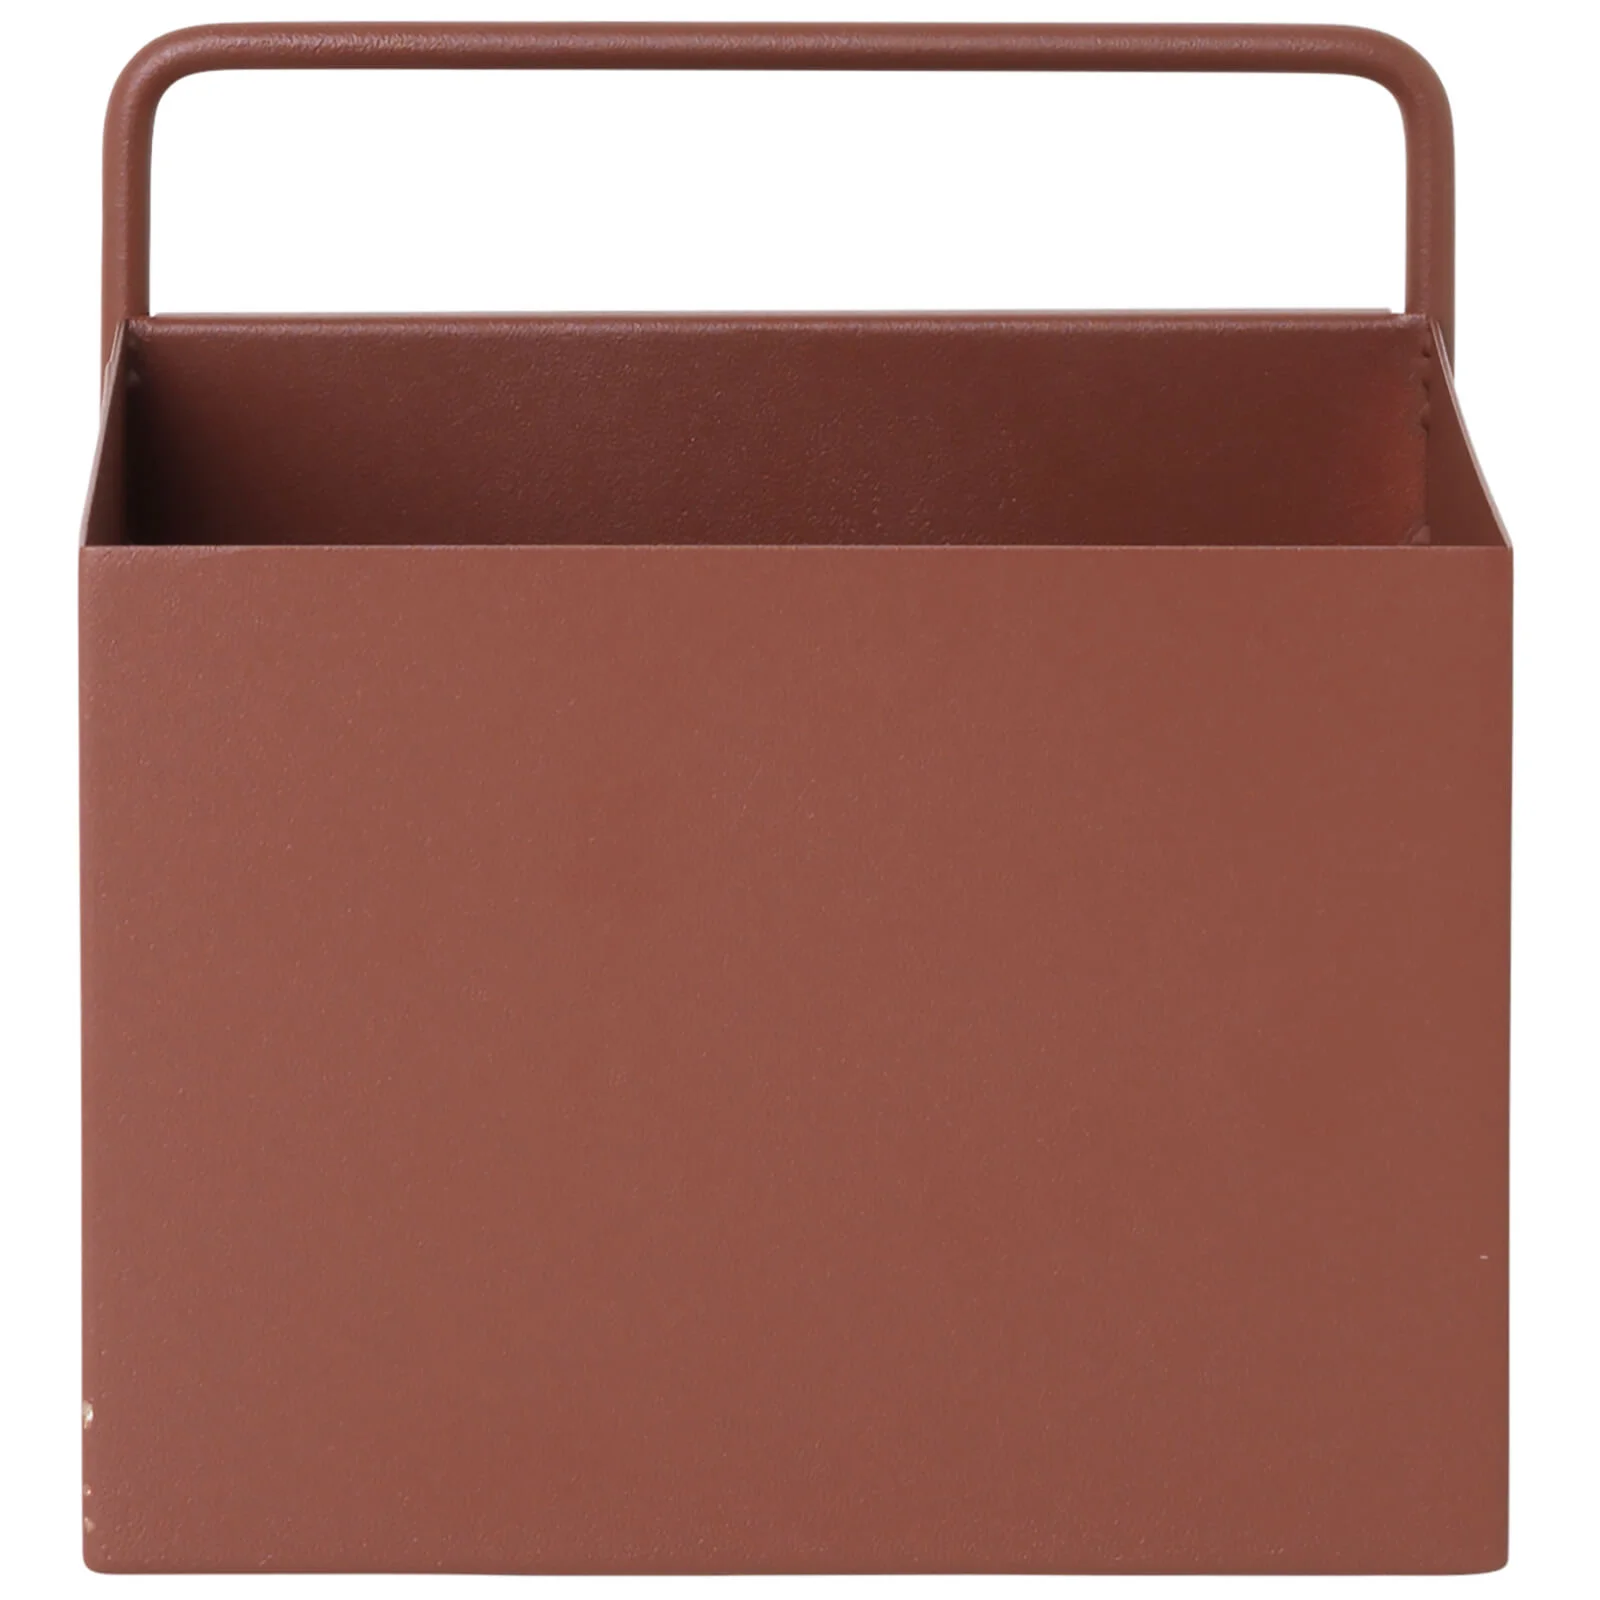 Ferm Living Wall Box - Square - Red/Brown Image 1